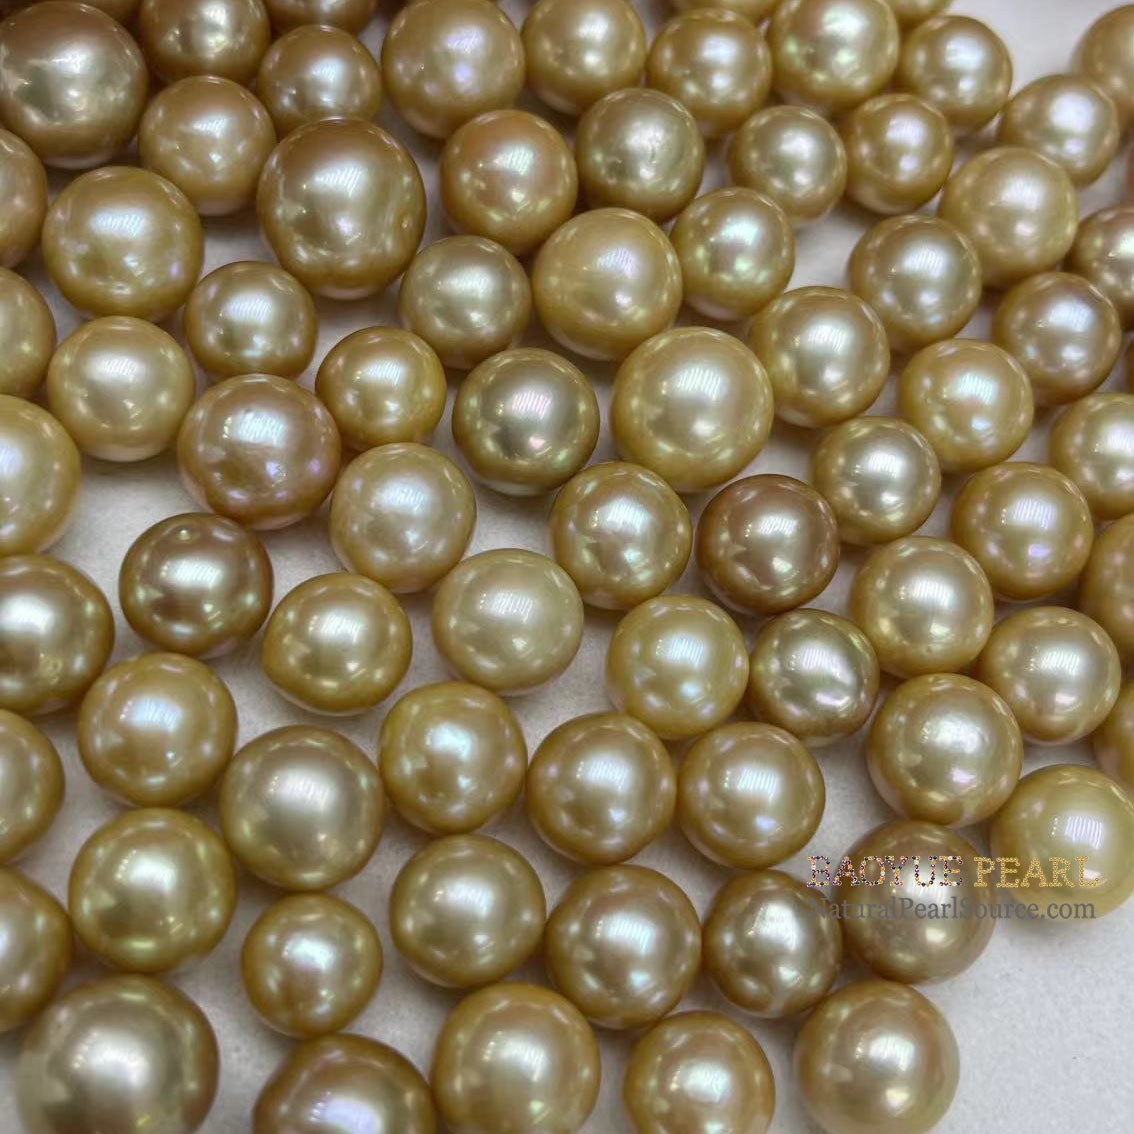 10-13 mm good quality AA grade perfect round golden pearls Real pearls wholesaler ,loose freshwater pearl with half or no hole drilled, Natural freshwater pearls loose freshwater pearl with half or no hole drilled